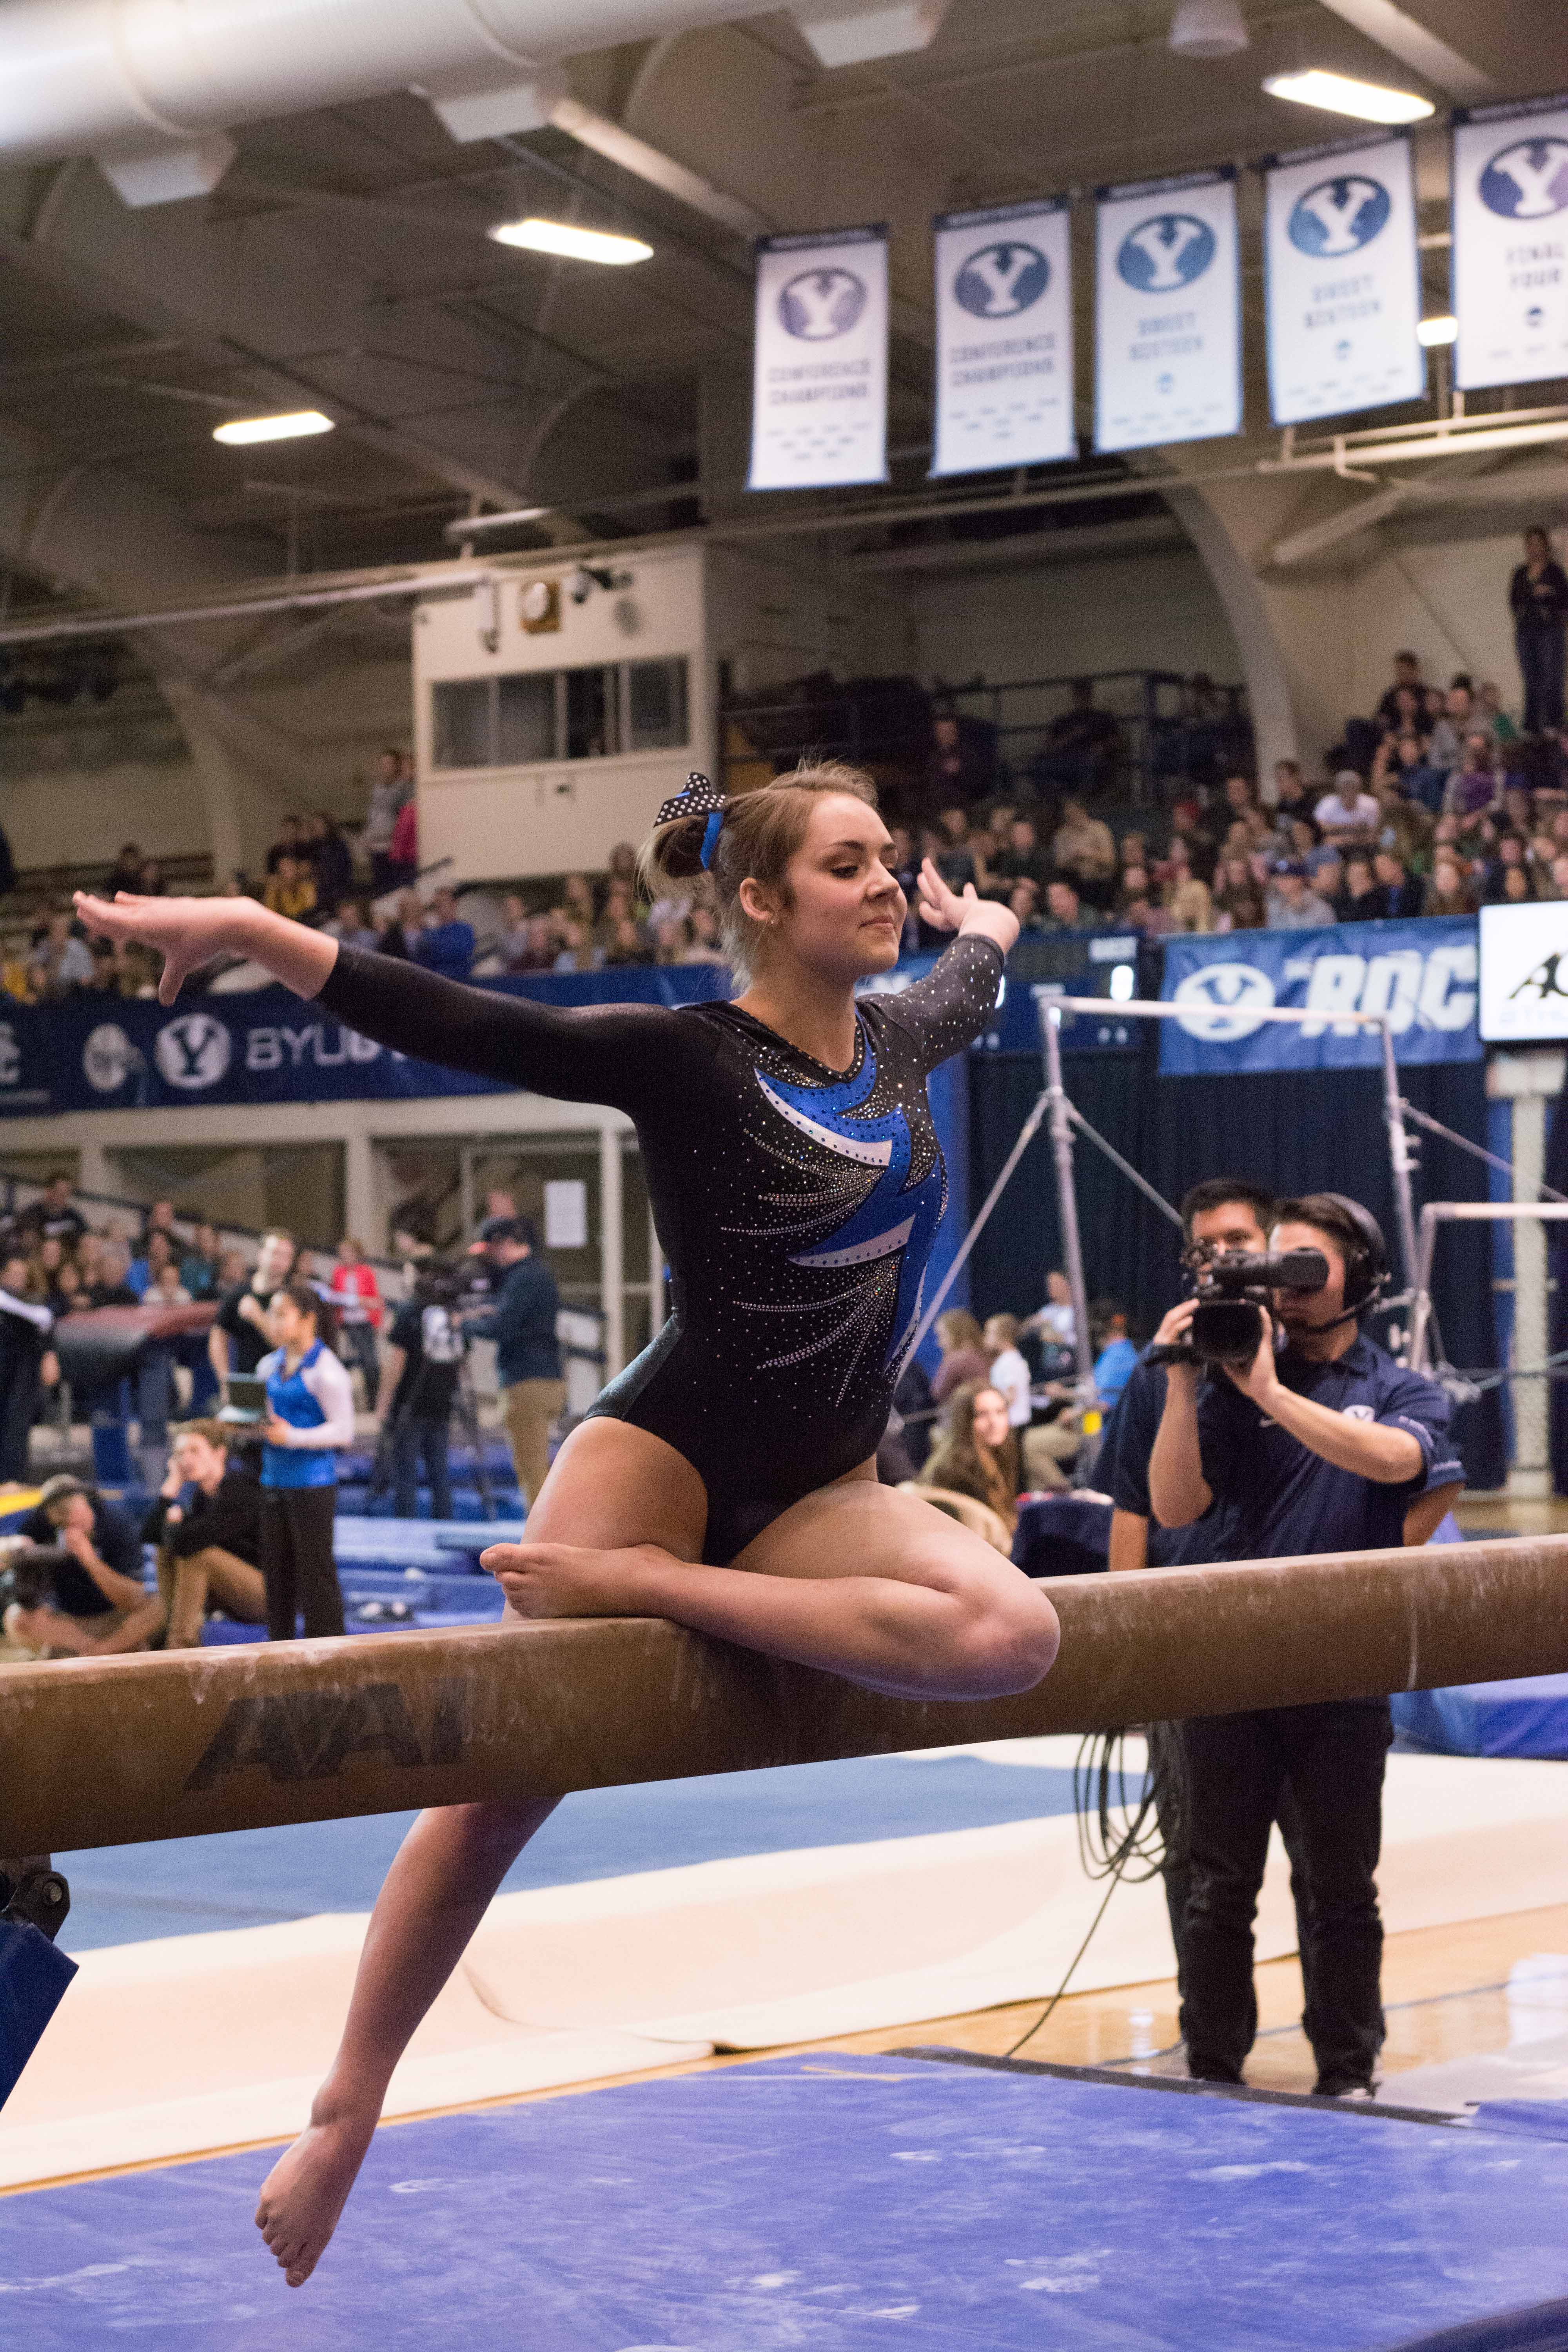 Falls prove costly as BYU gymnastics takes second place - The Daily Universe